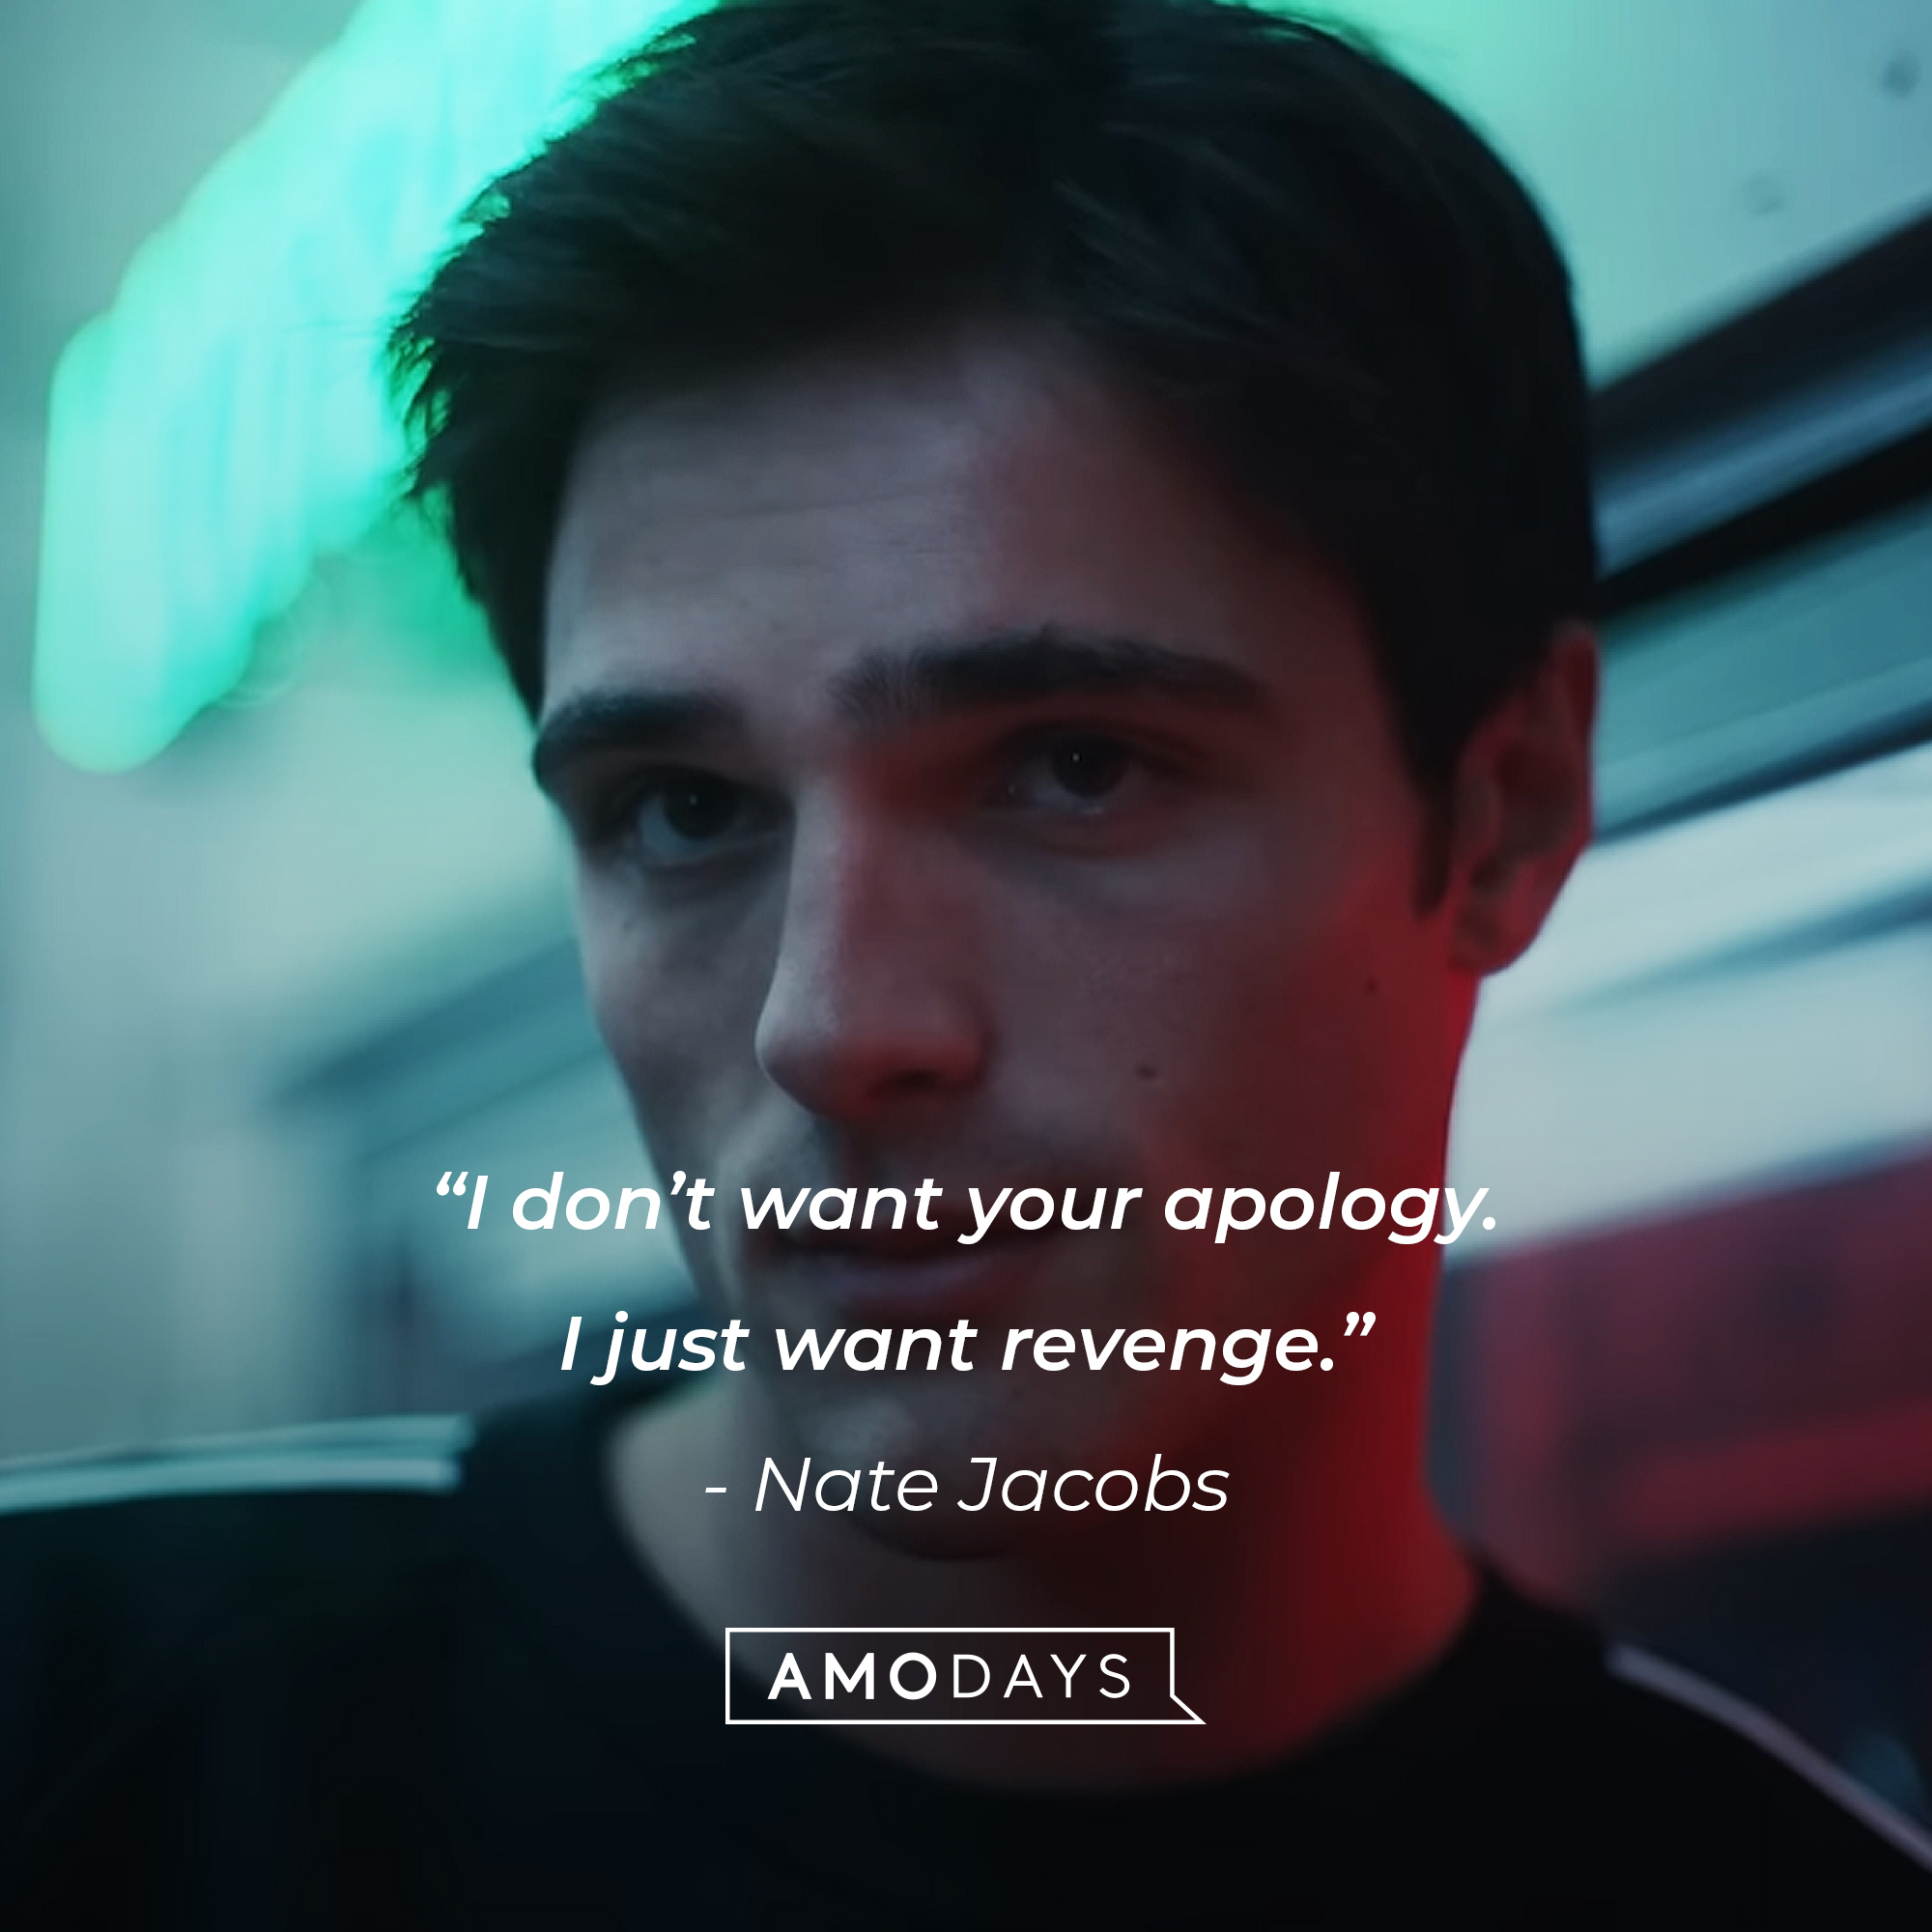 An image of Nate Jacobs, with his quote: “I don’t want your apology. I just want revenge.”  | Source: HBO